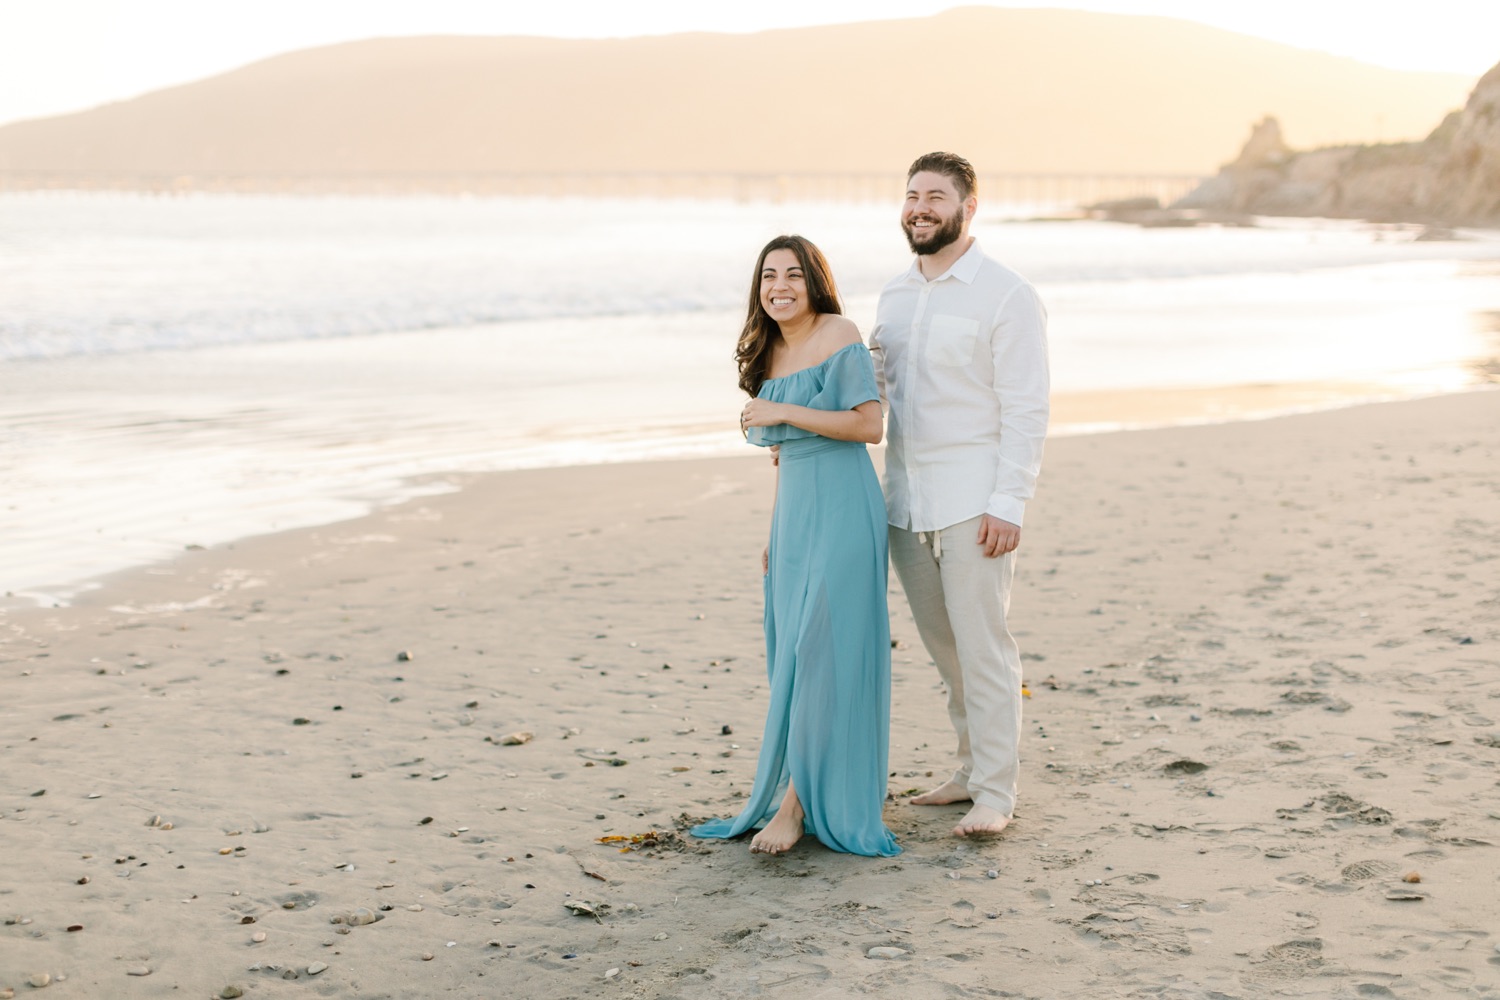 Avila beach engagement session by tayler Enerle photography